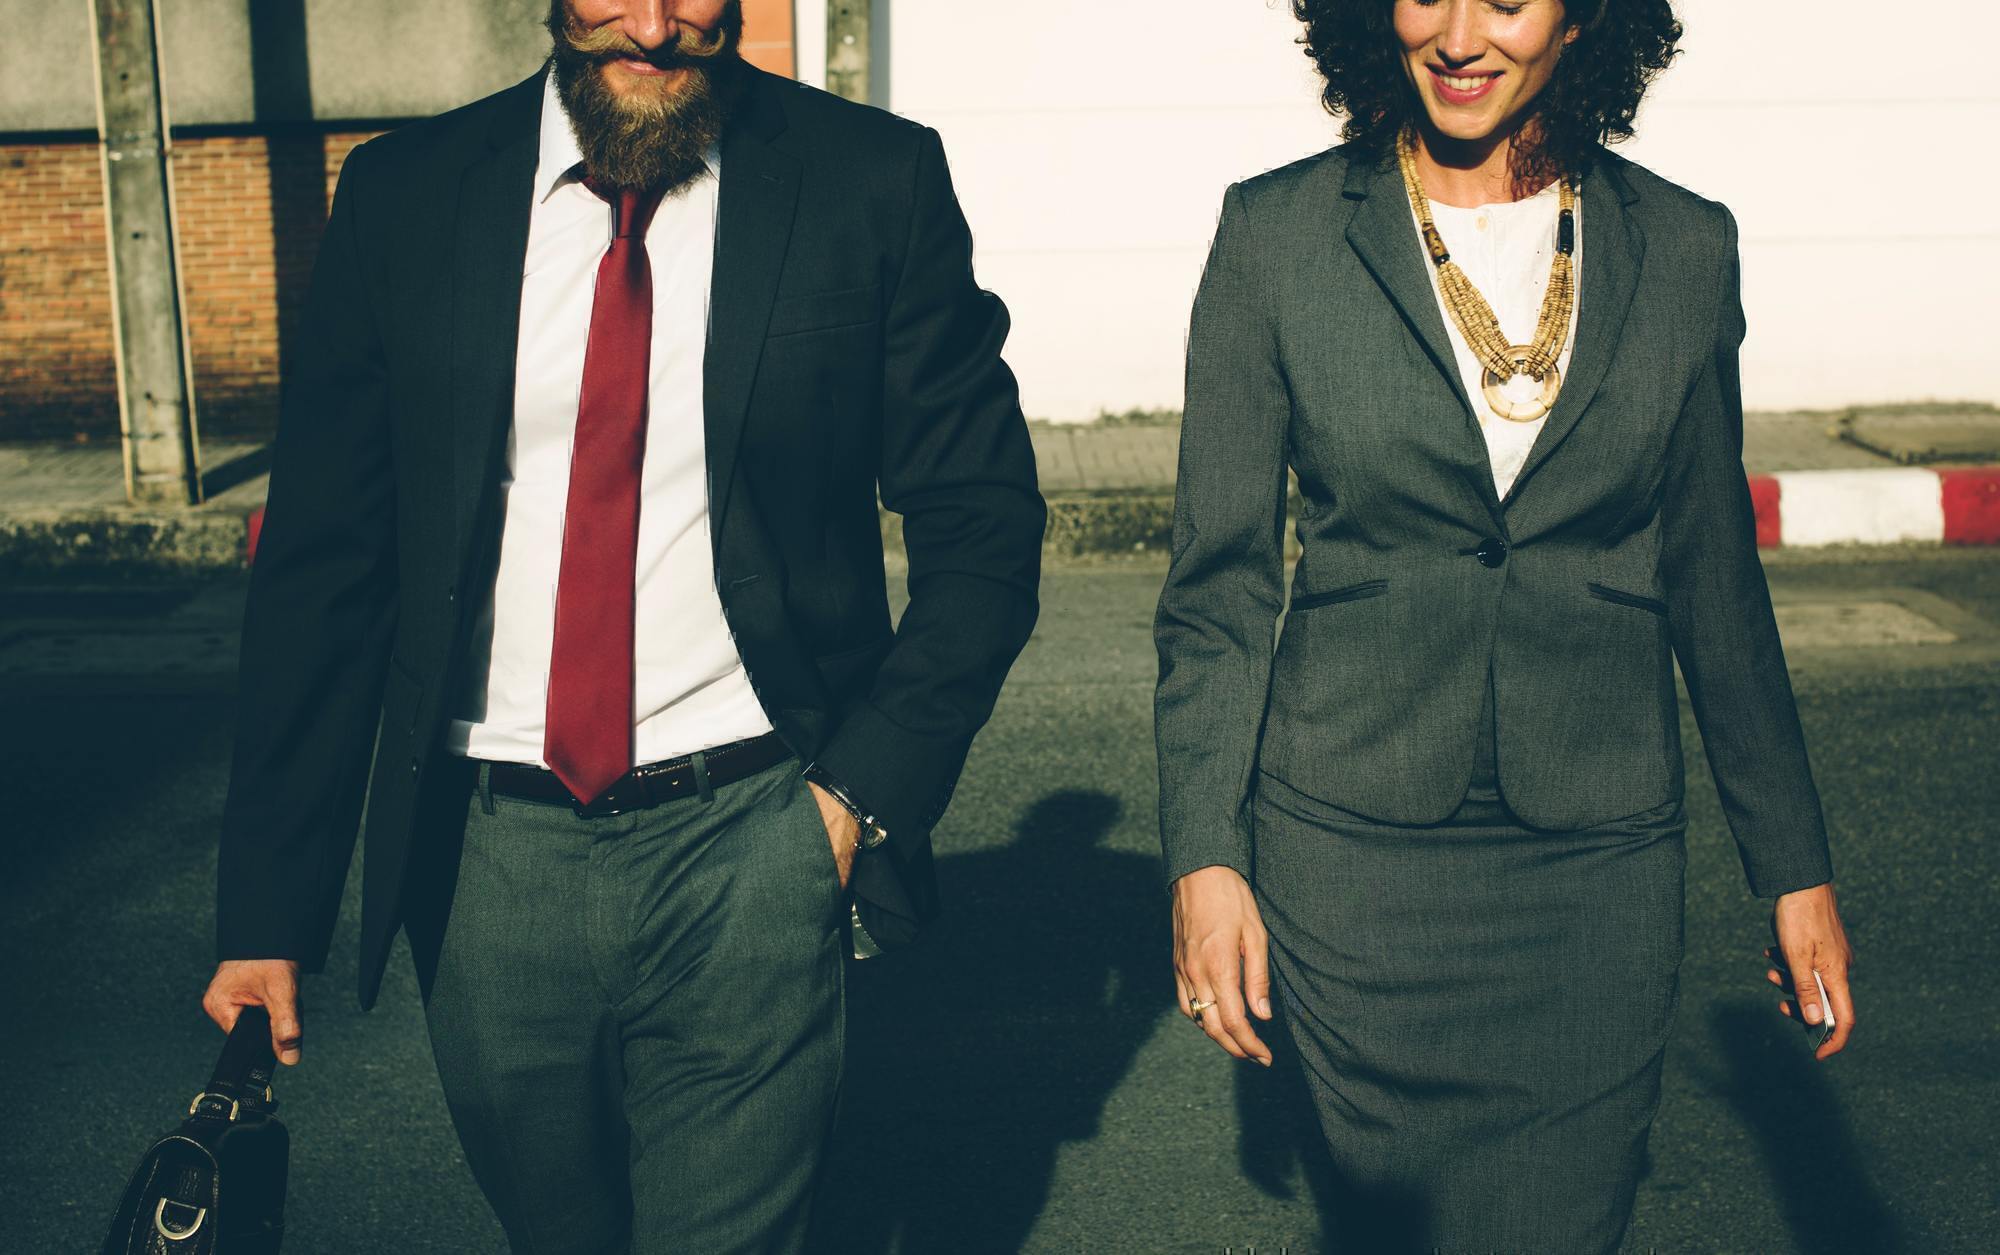 a man and woman walking in business formal attire